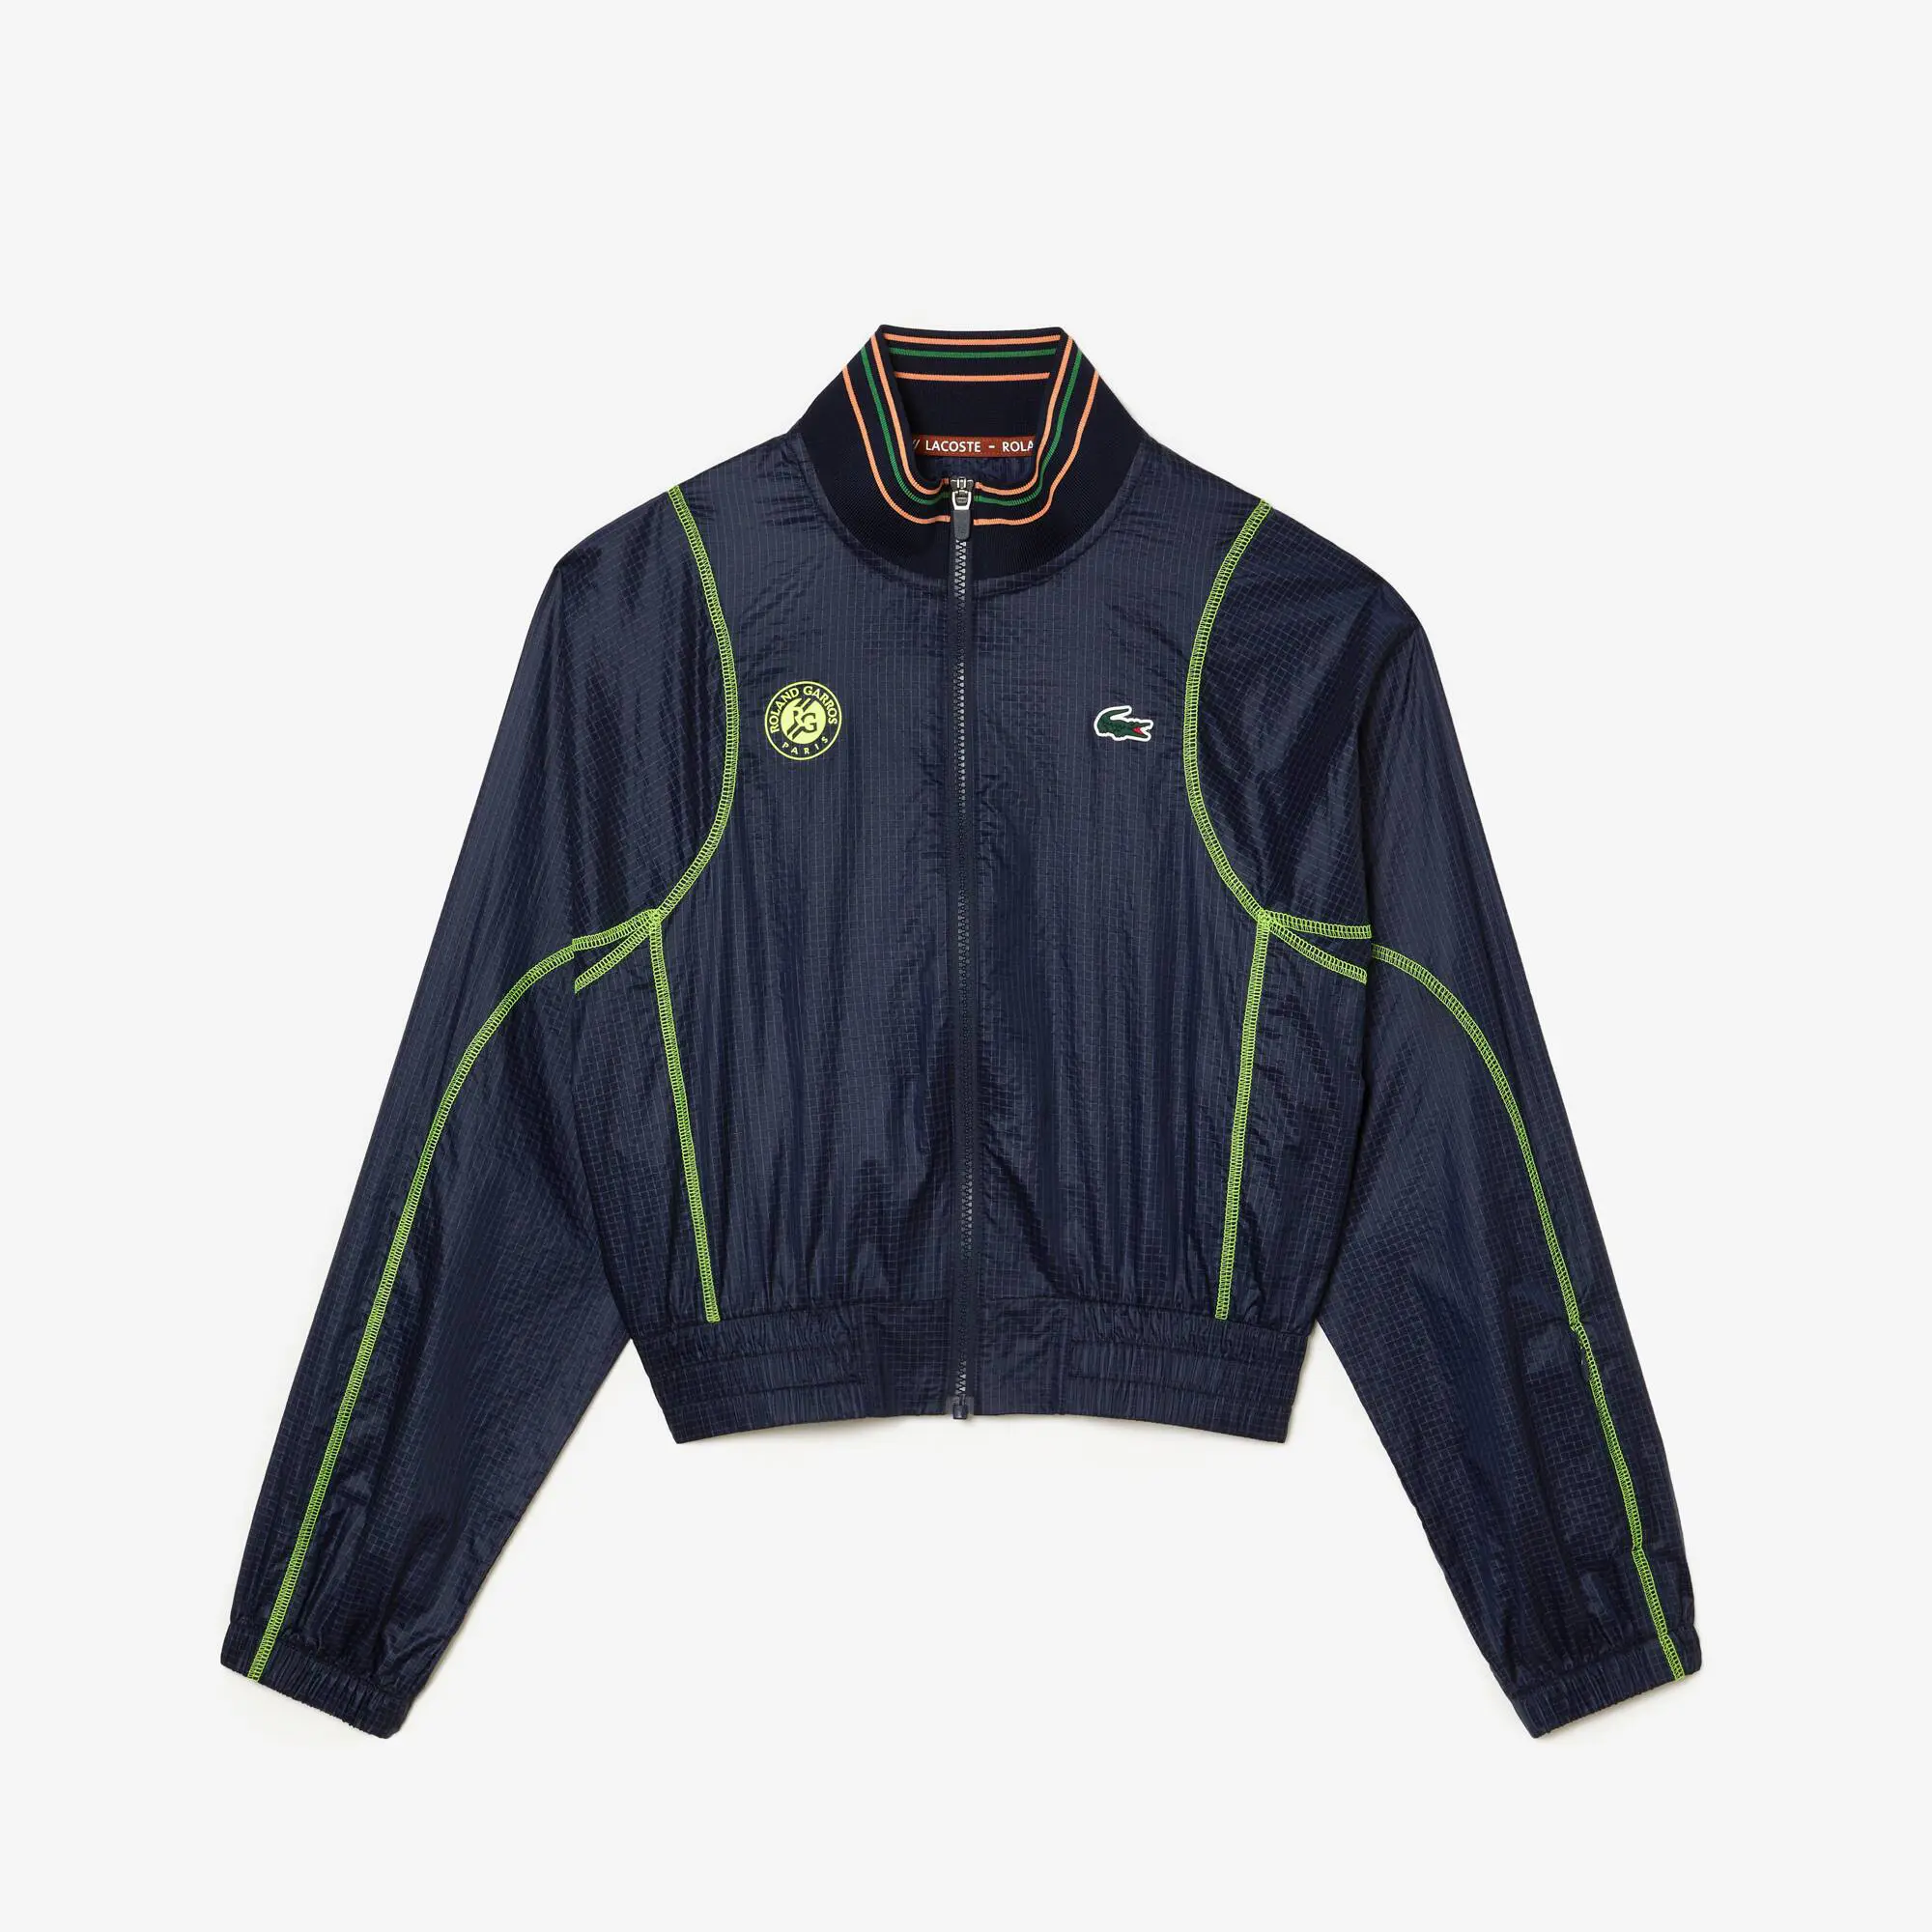 Lacoste Women’s Roland Garros Edition Post-Match Cropped Jacket. 2